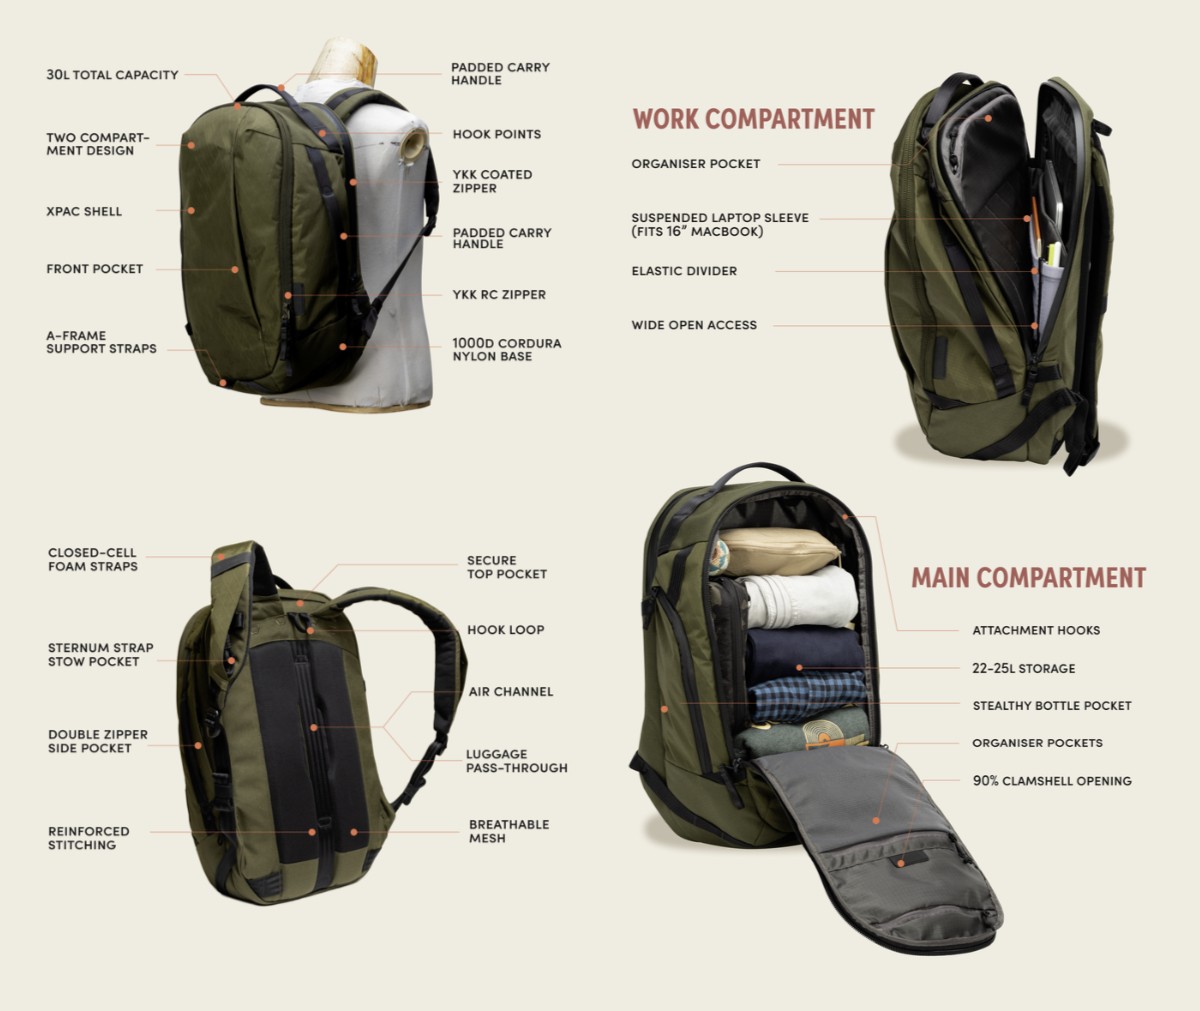 Able Carry Max Backpack - Mukama